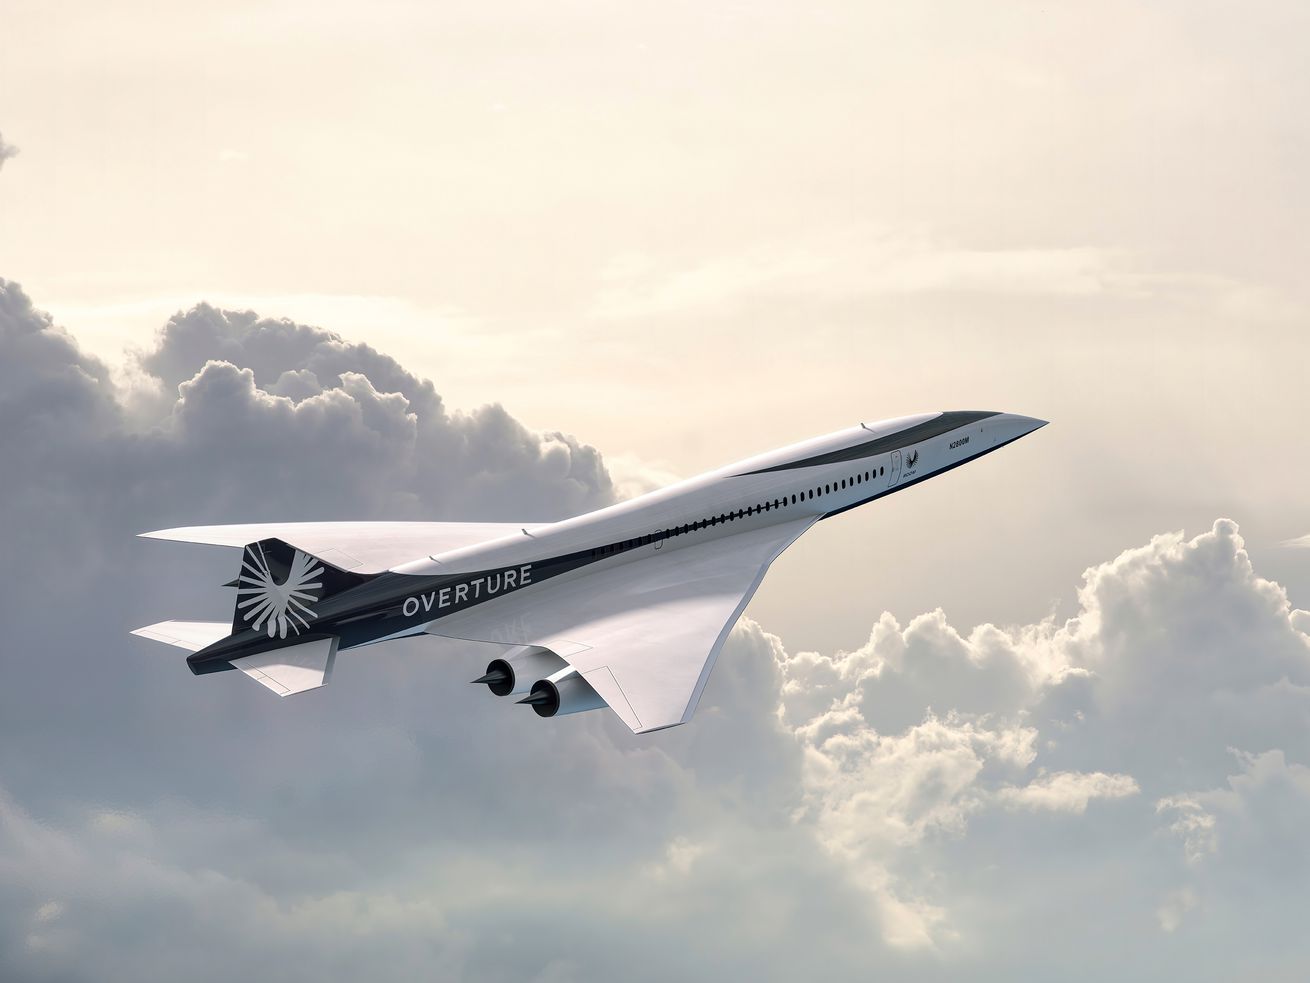 Airlines are trying to resurrect the Concorde era